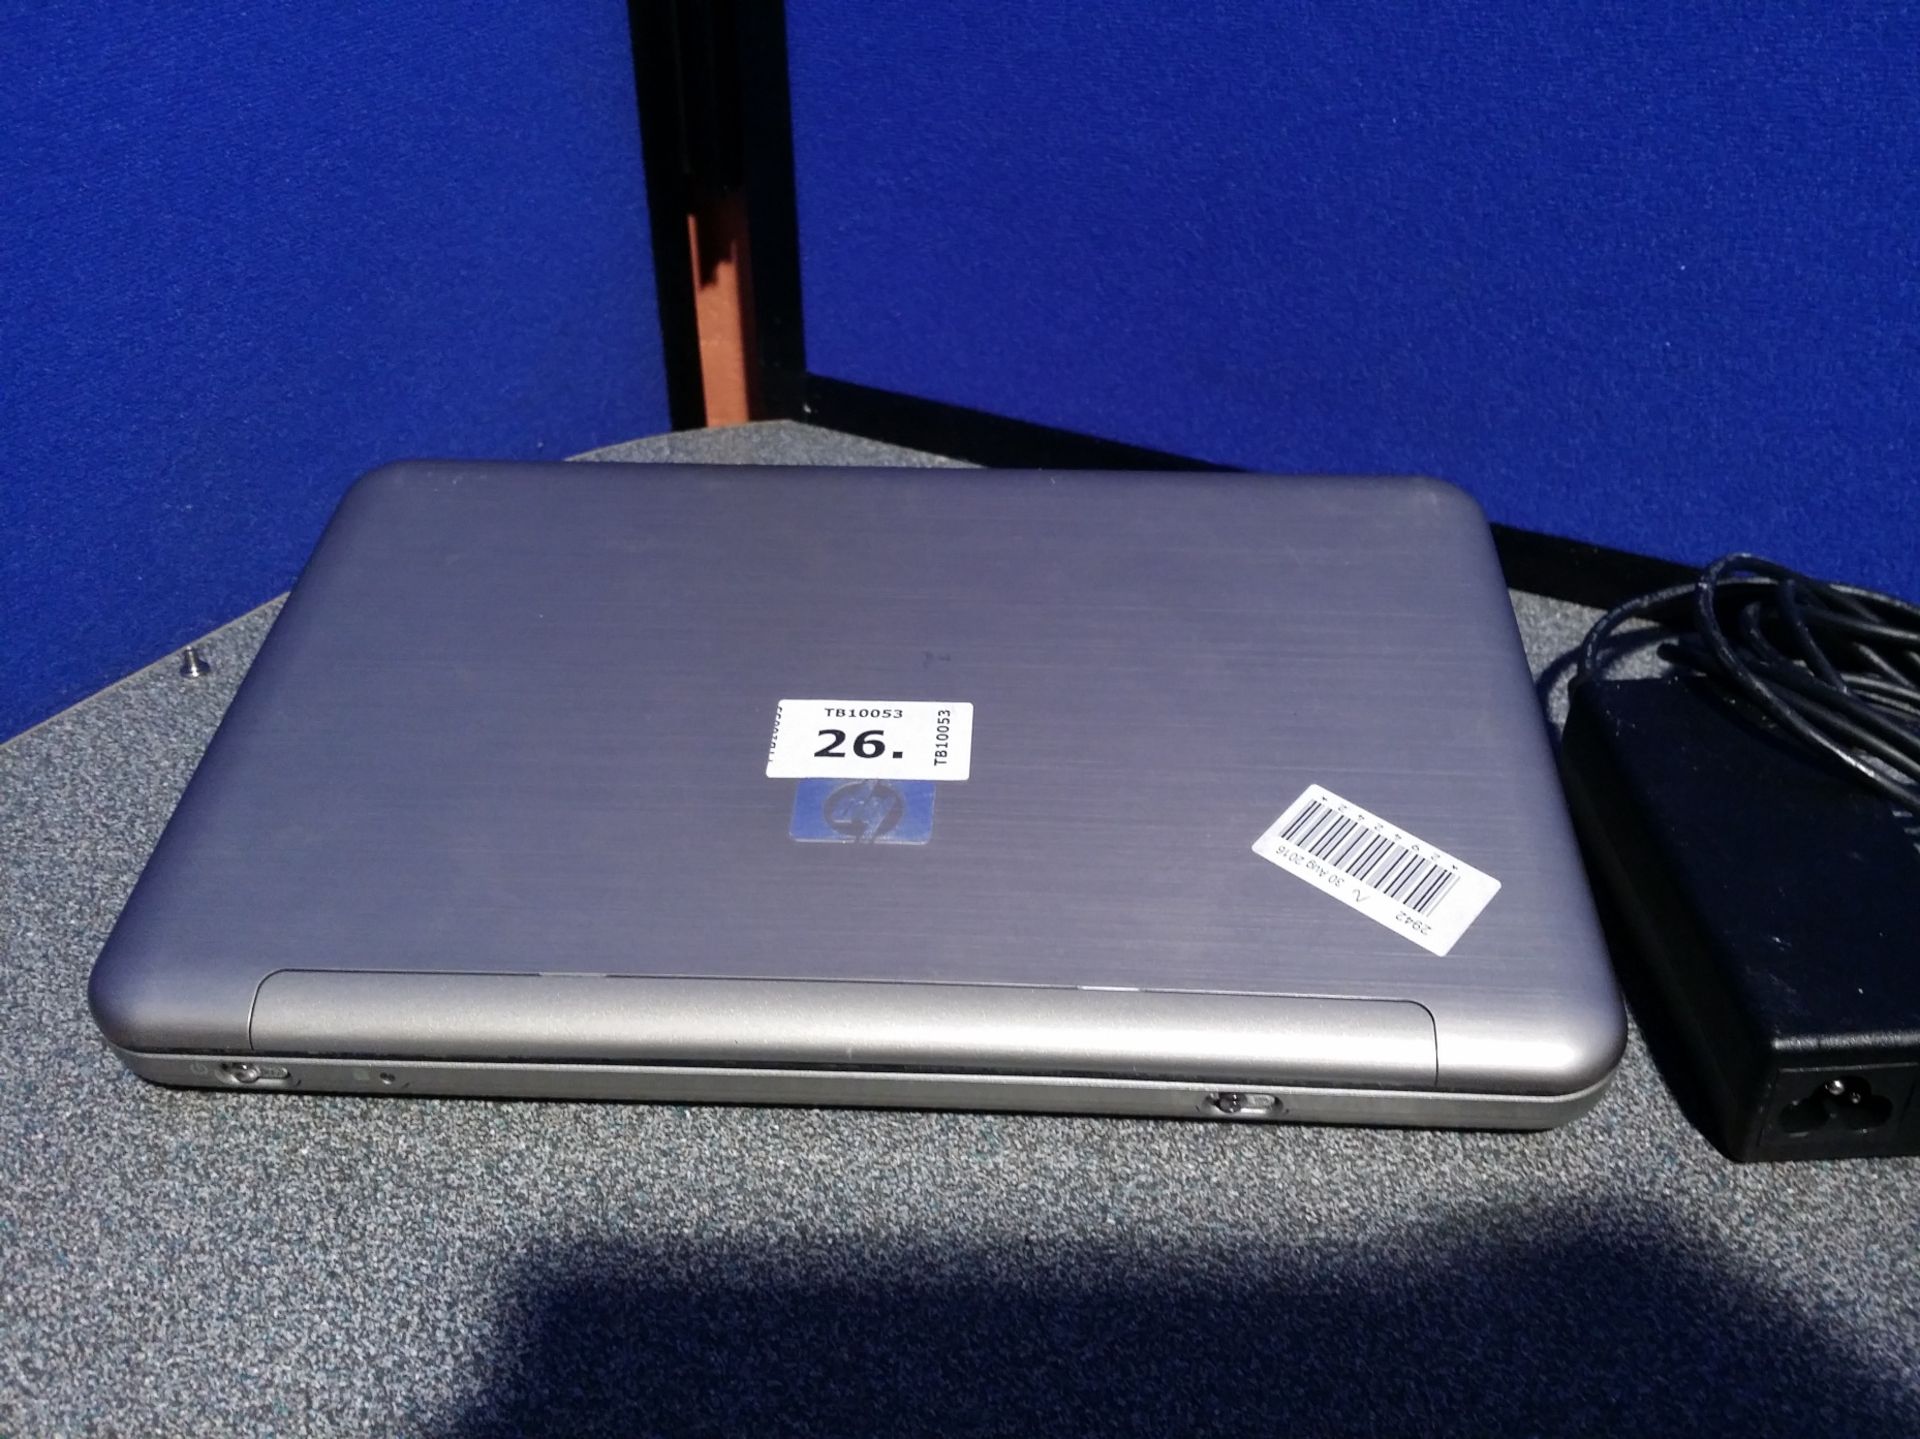 HP Mini 2140 Netbook - Intel Atom N270 1.60Ghz - 2GB Ram - 160Gb Hdd - Webcam - Charger - Powers On - Image 2 of 2